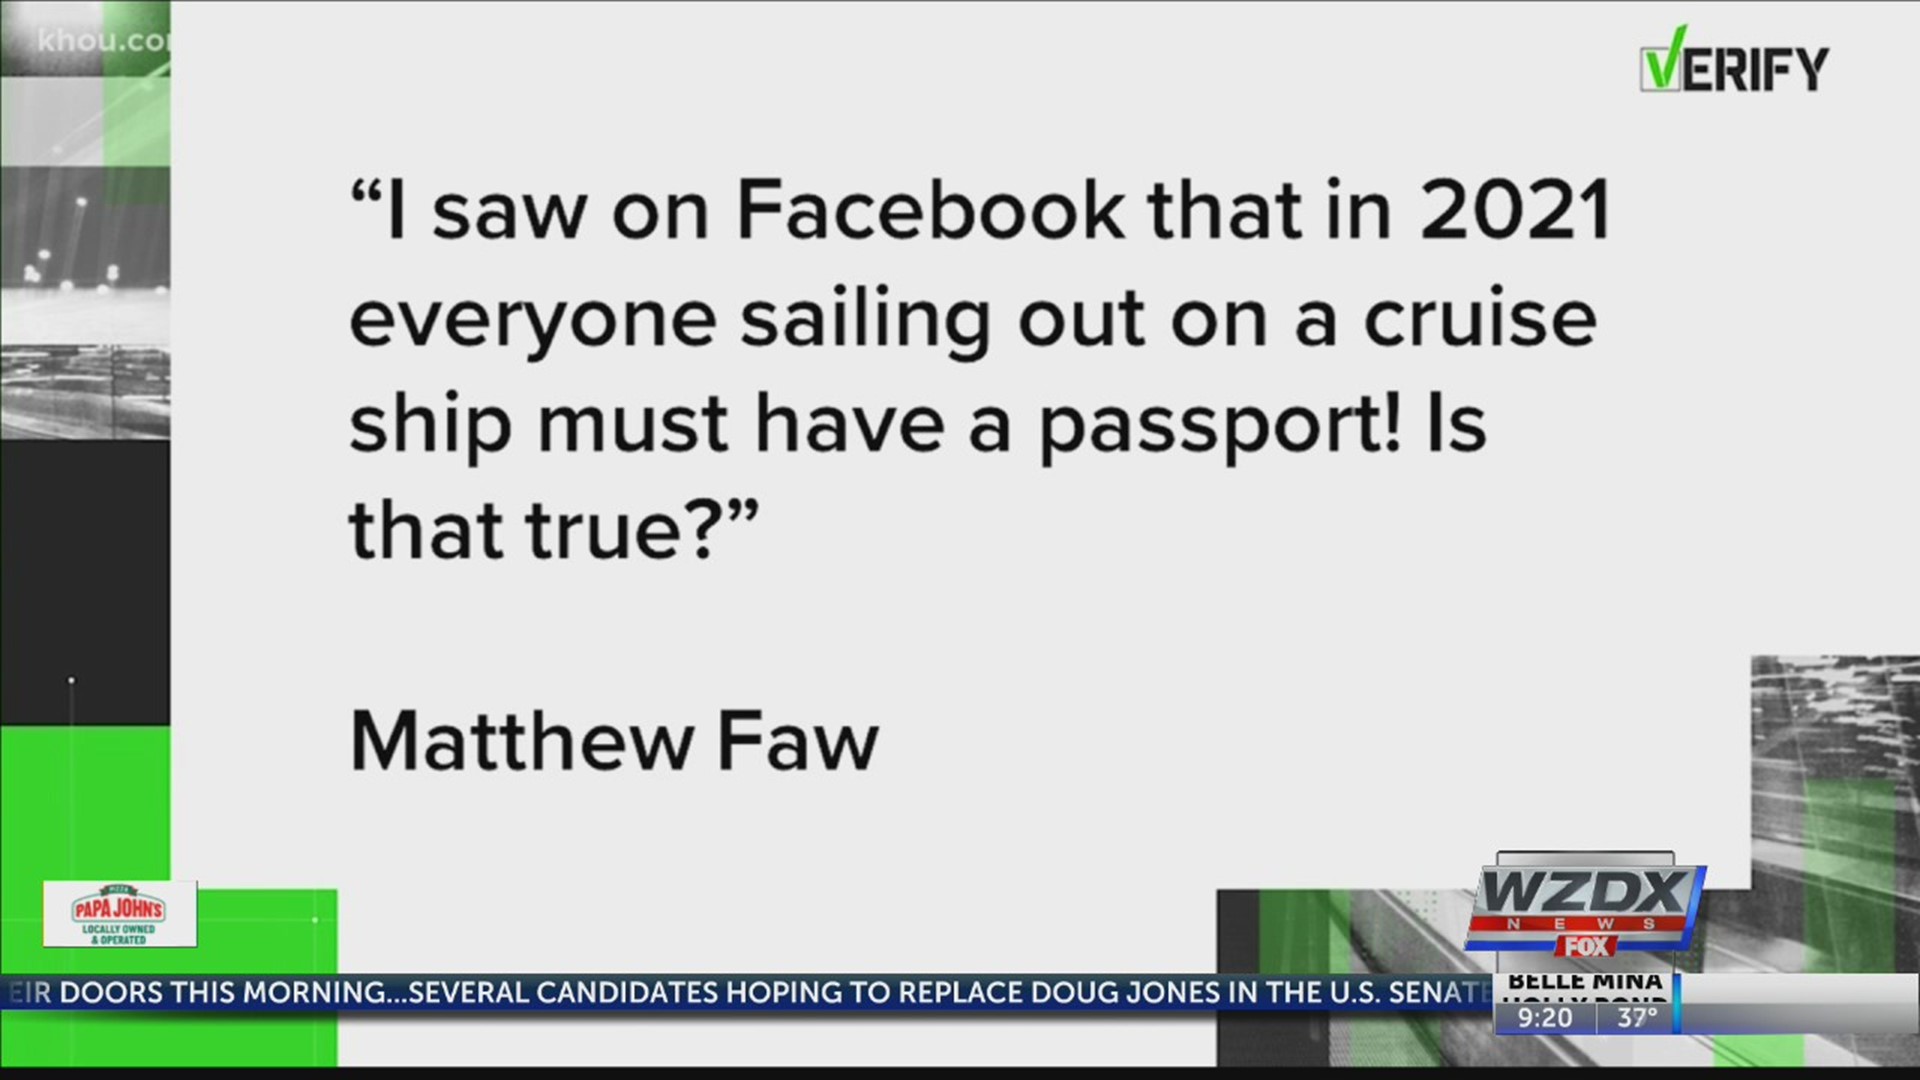 A viewer wrote into Tegna's Verify team after seeing a suspicious post on Facebook. Matthew Faw emailed saying he "Saw on Facebook that in 2021 everyone sailing out on a cruise ship must have a passport! Is that true?" That would be big news, so we needed to get Matthew answers.